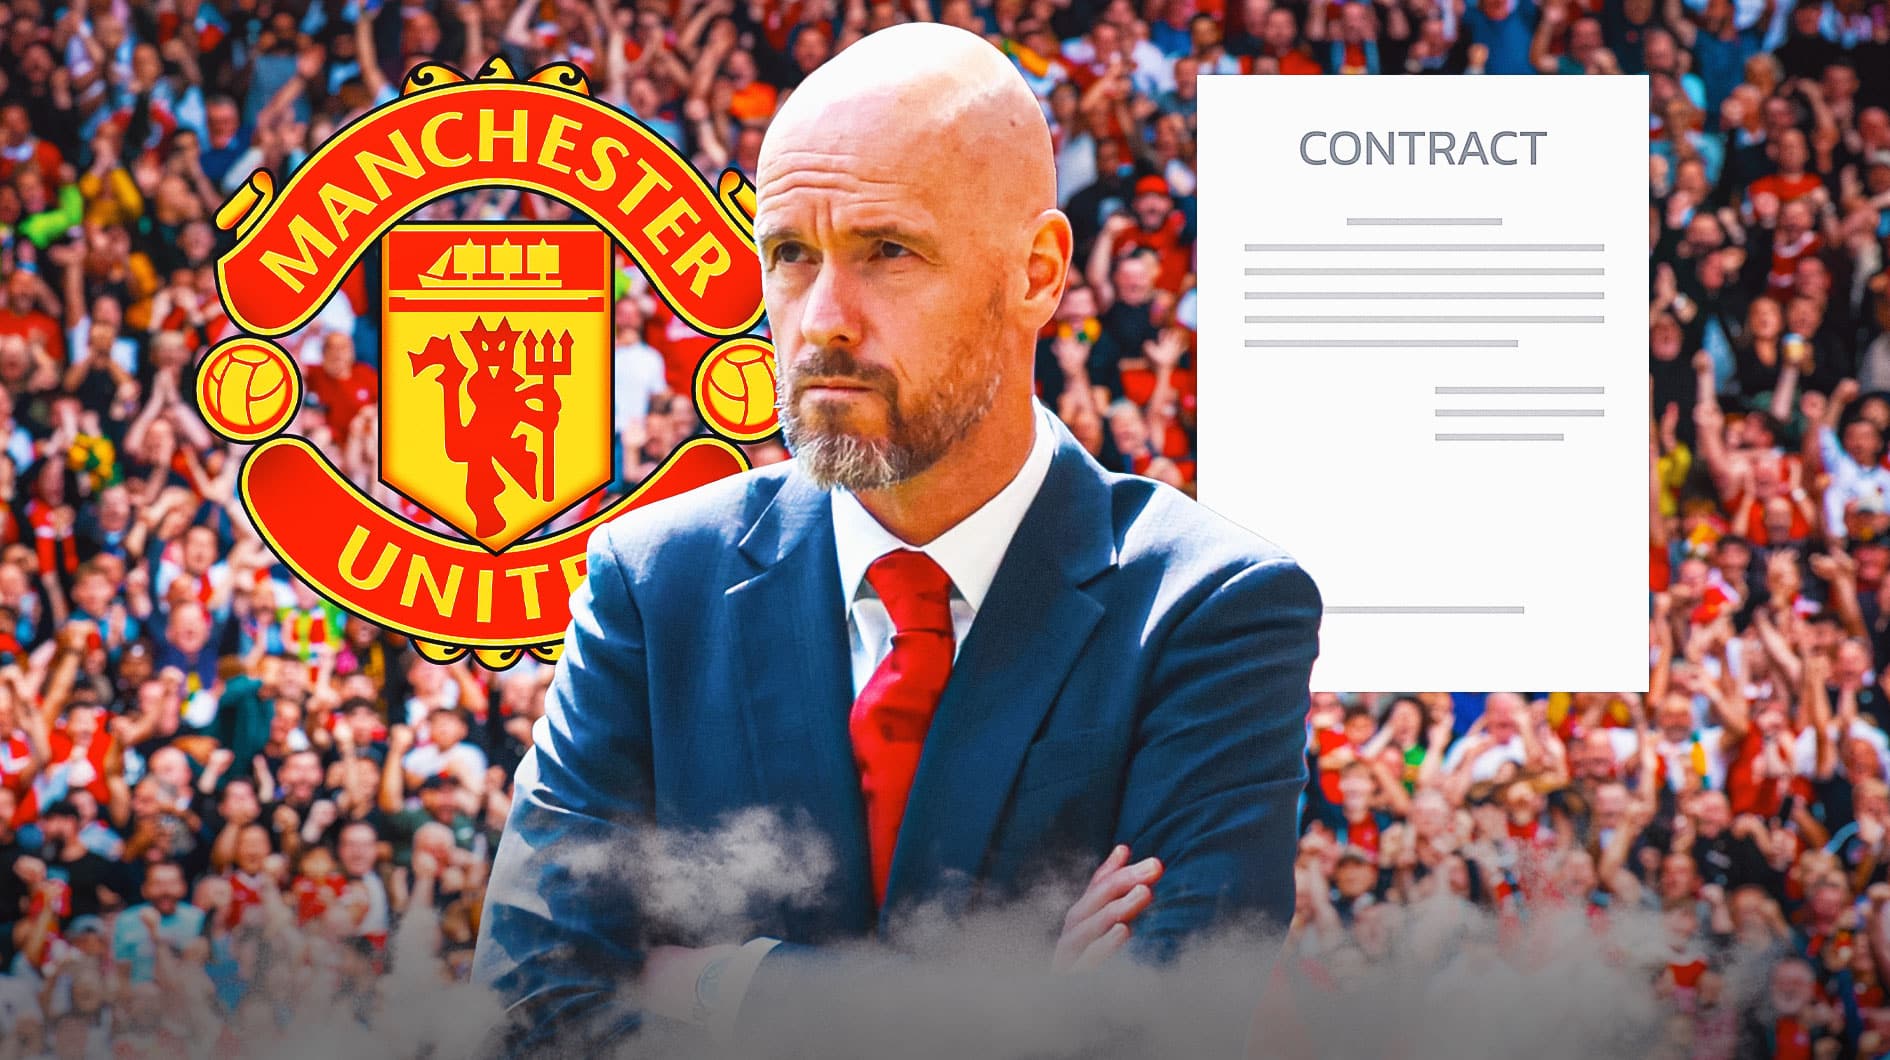 Erik ten Hag’s new Manchester United contract details revealed